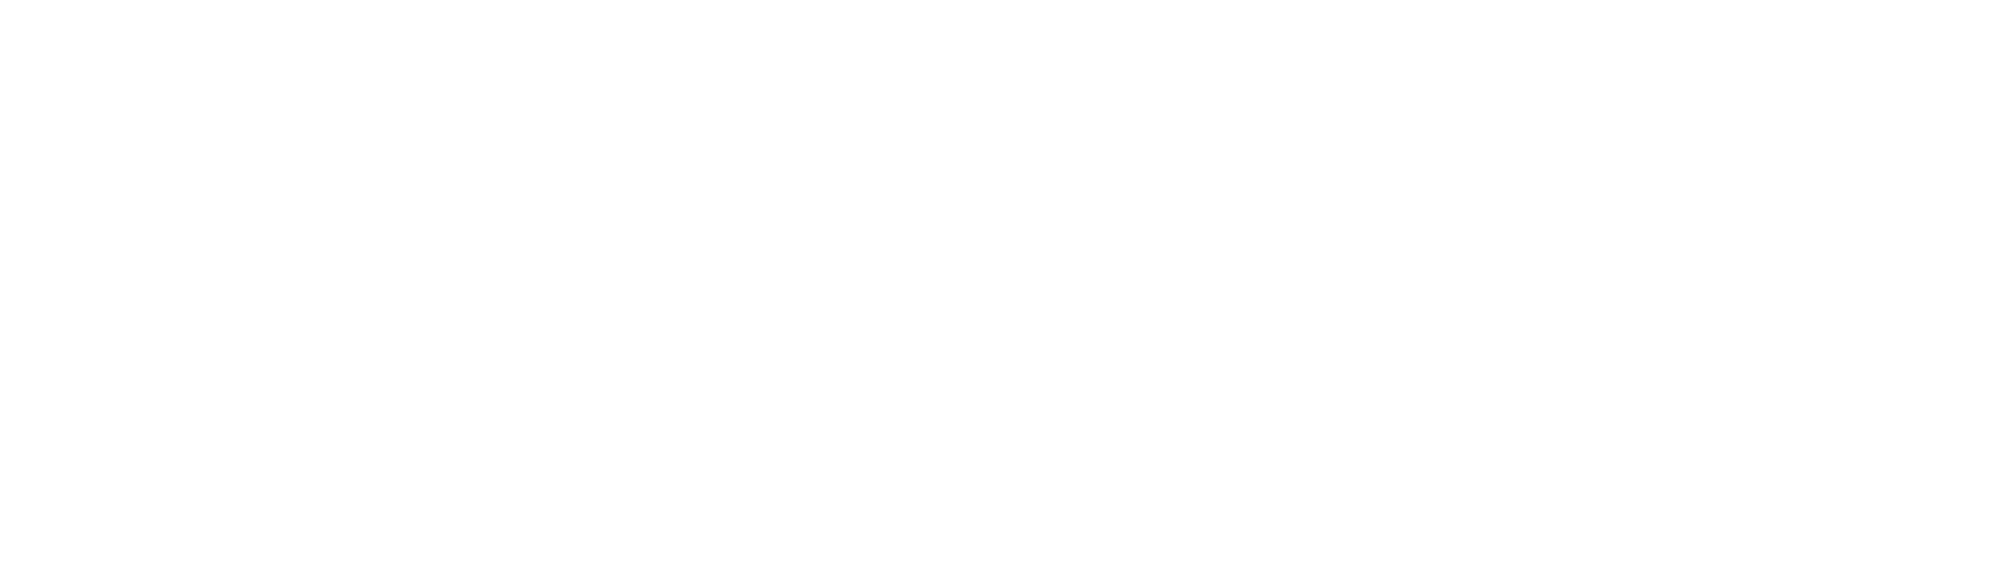 We're the biggest business school in the United States typographic quote